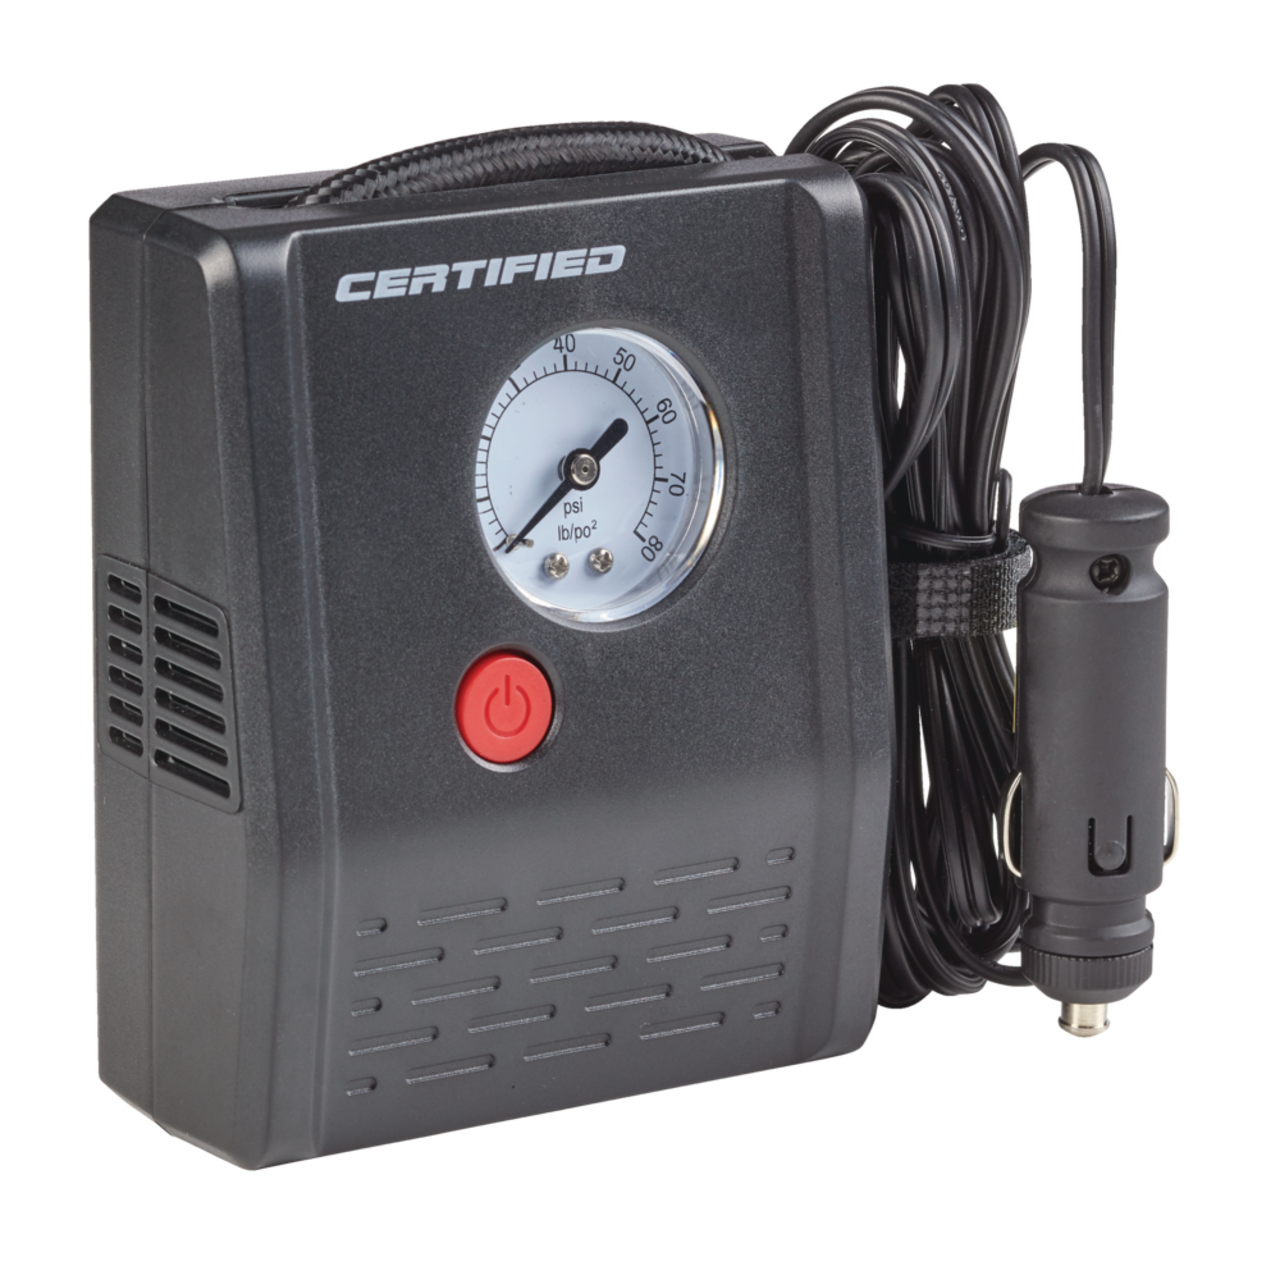 Certified 12 V Top-Off Portable Air Compressor / Tire Inflator